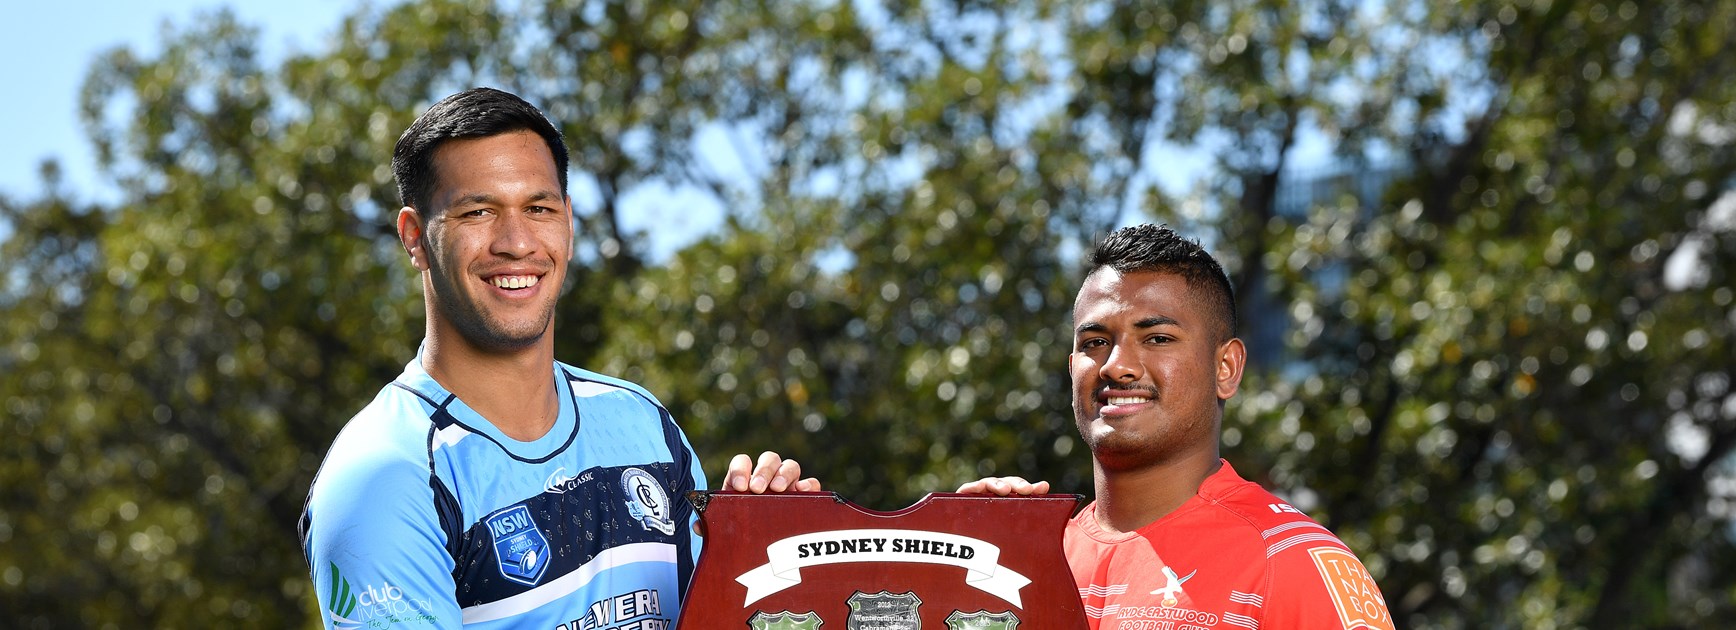 Preview | Sydney Shield Grand Final 2019